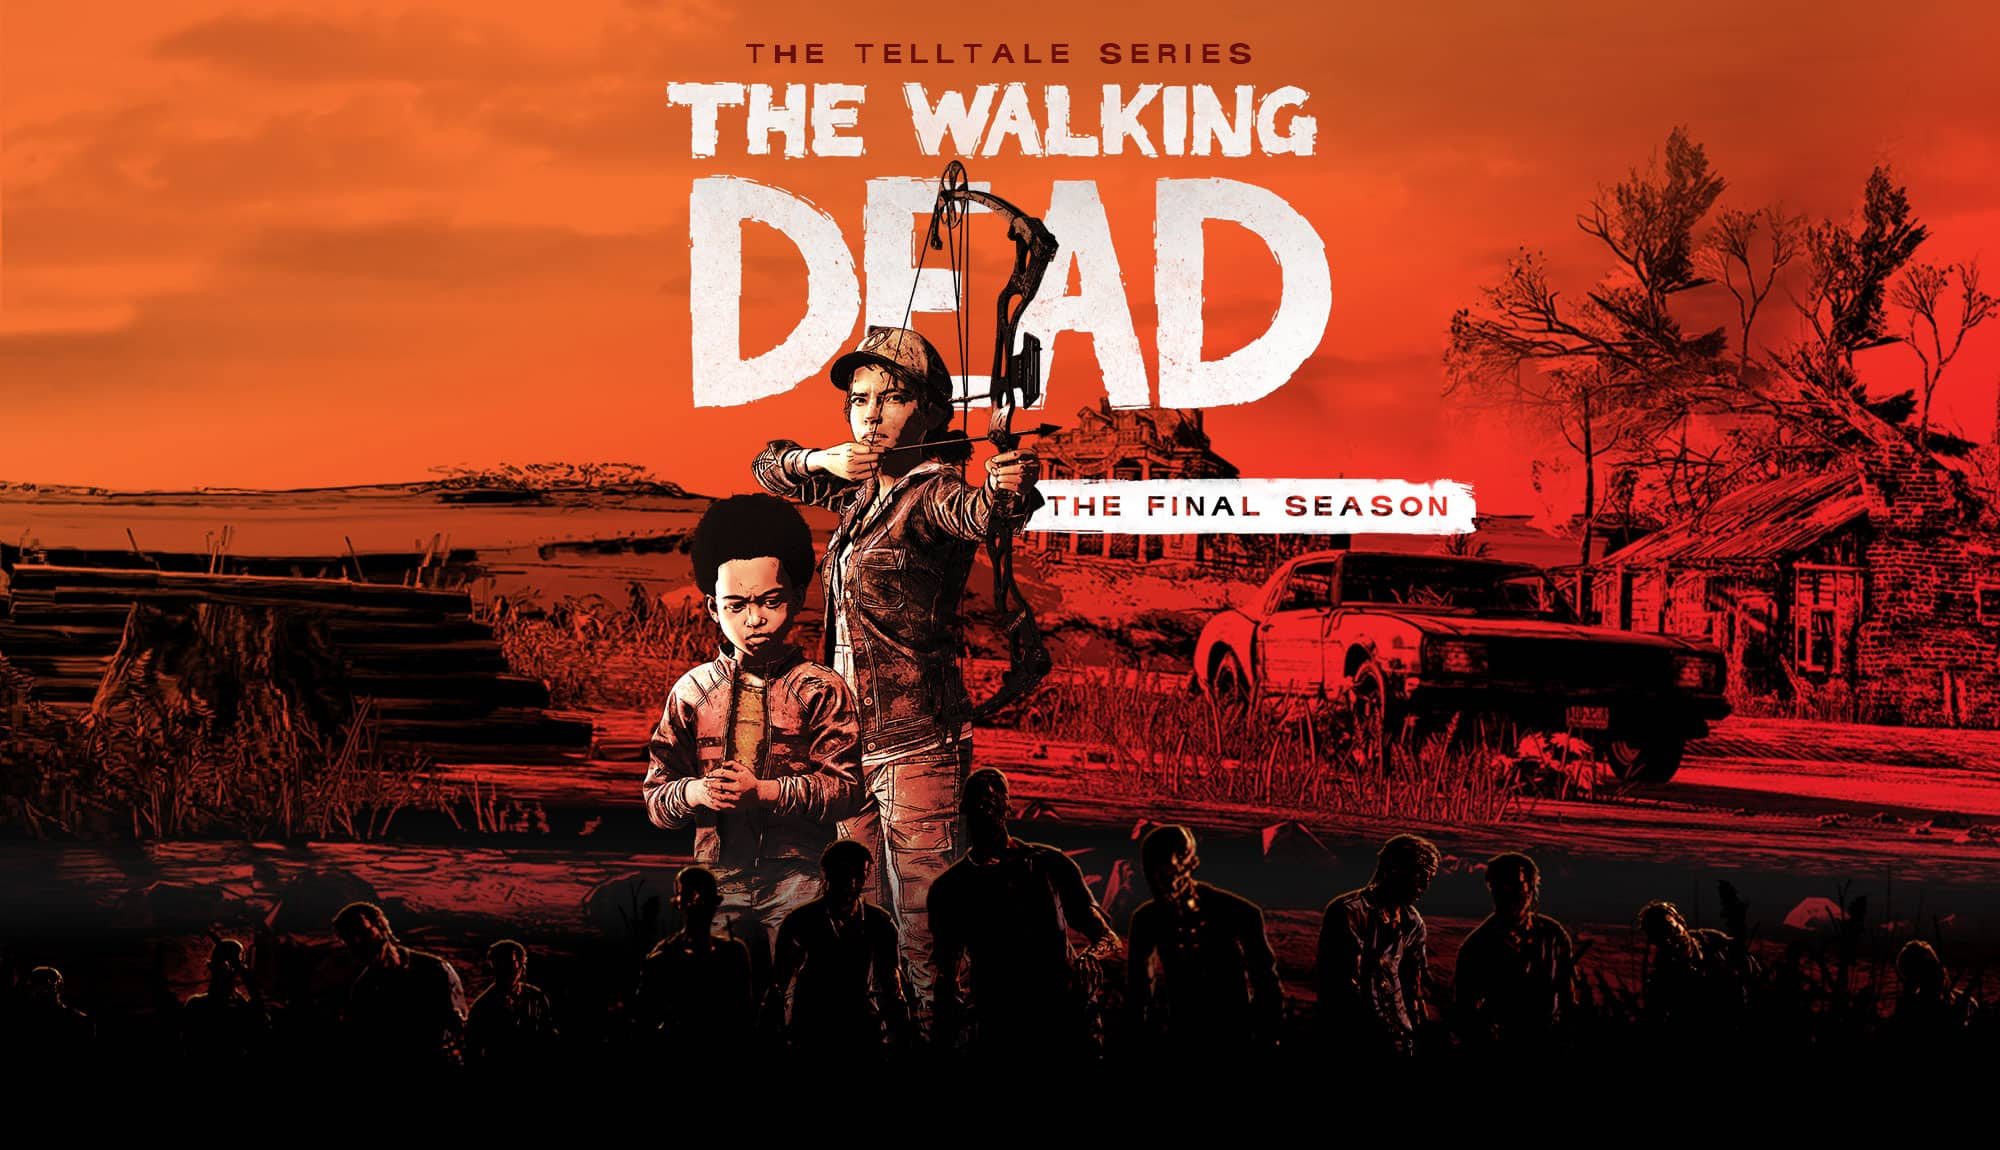 The Walking Dead The Final Season Episode 4 OUT NOW!!